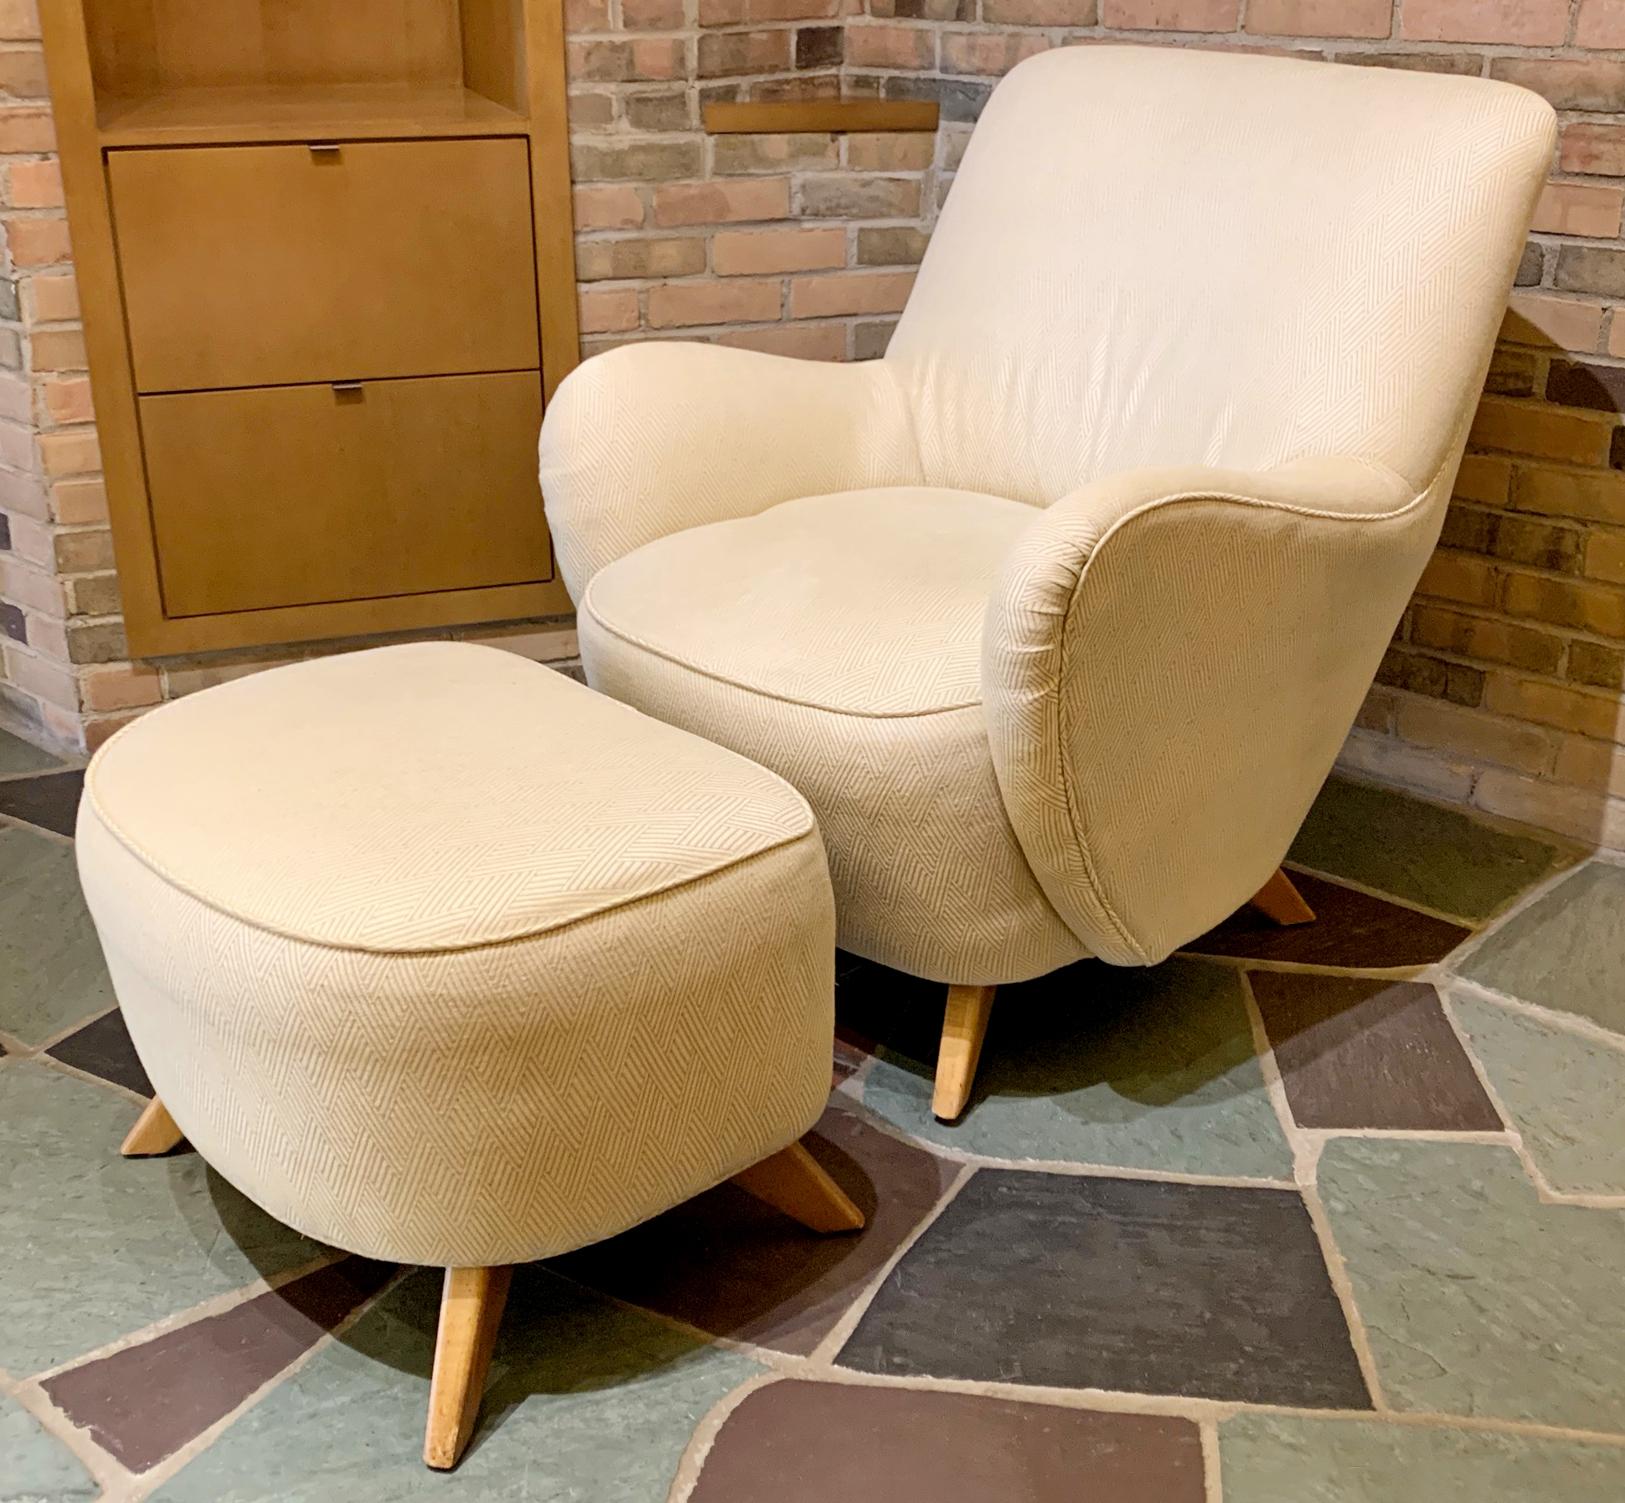 For your consideration is an excellent, high back, barrel chair with matching ottoman, #100B by Vladimir Kagan, circa 1970s. In excellent vintage condition, with a professional reupholstery in the last ten years. Dimensions: Chair - 32 W x 40